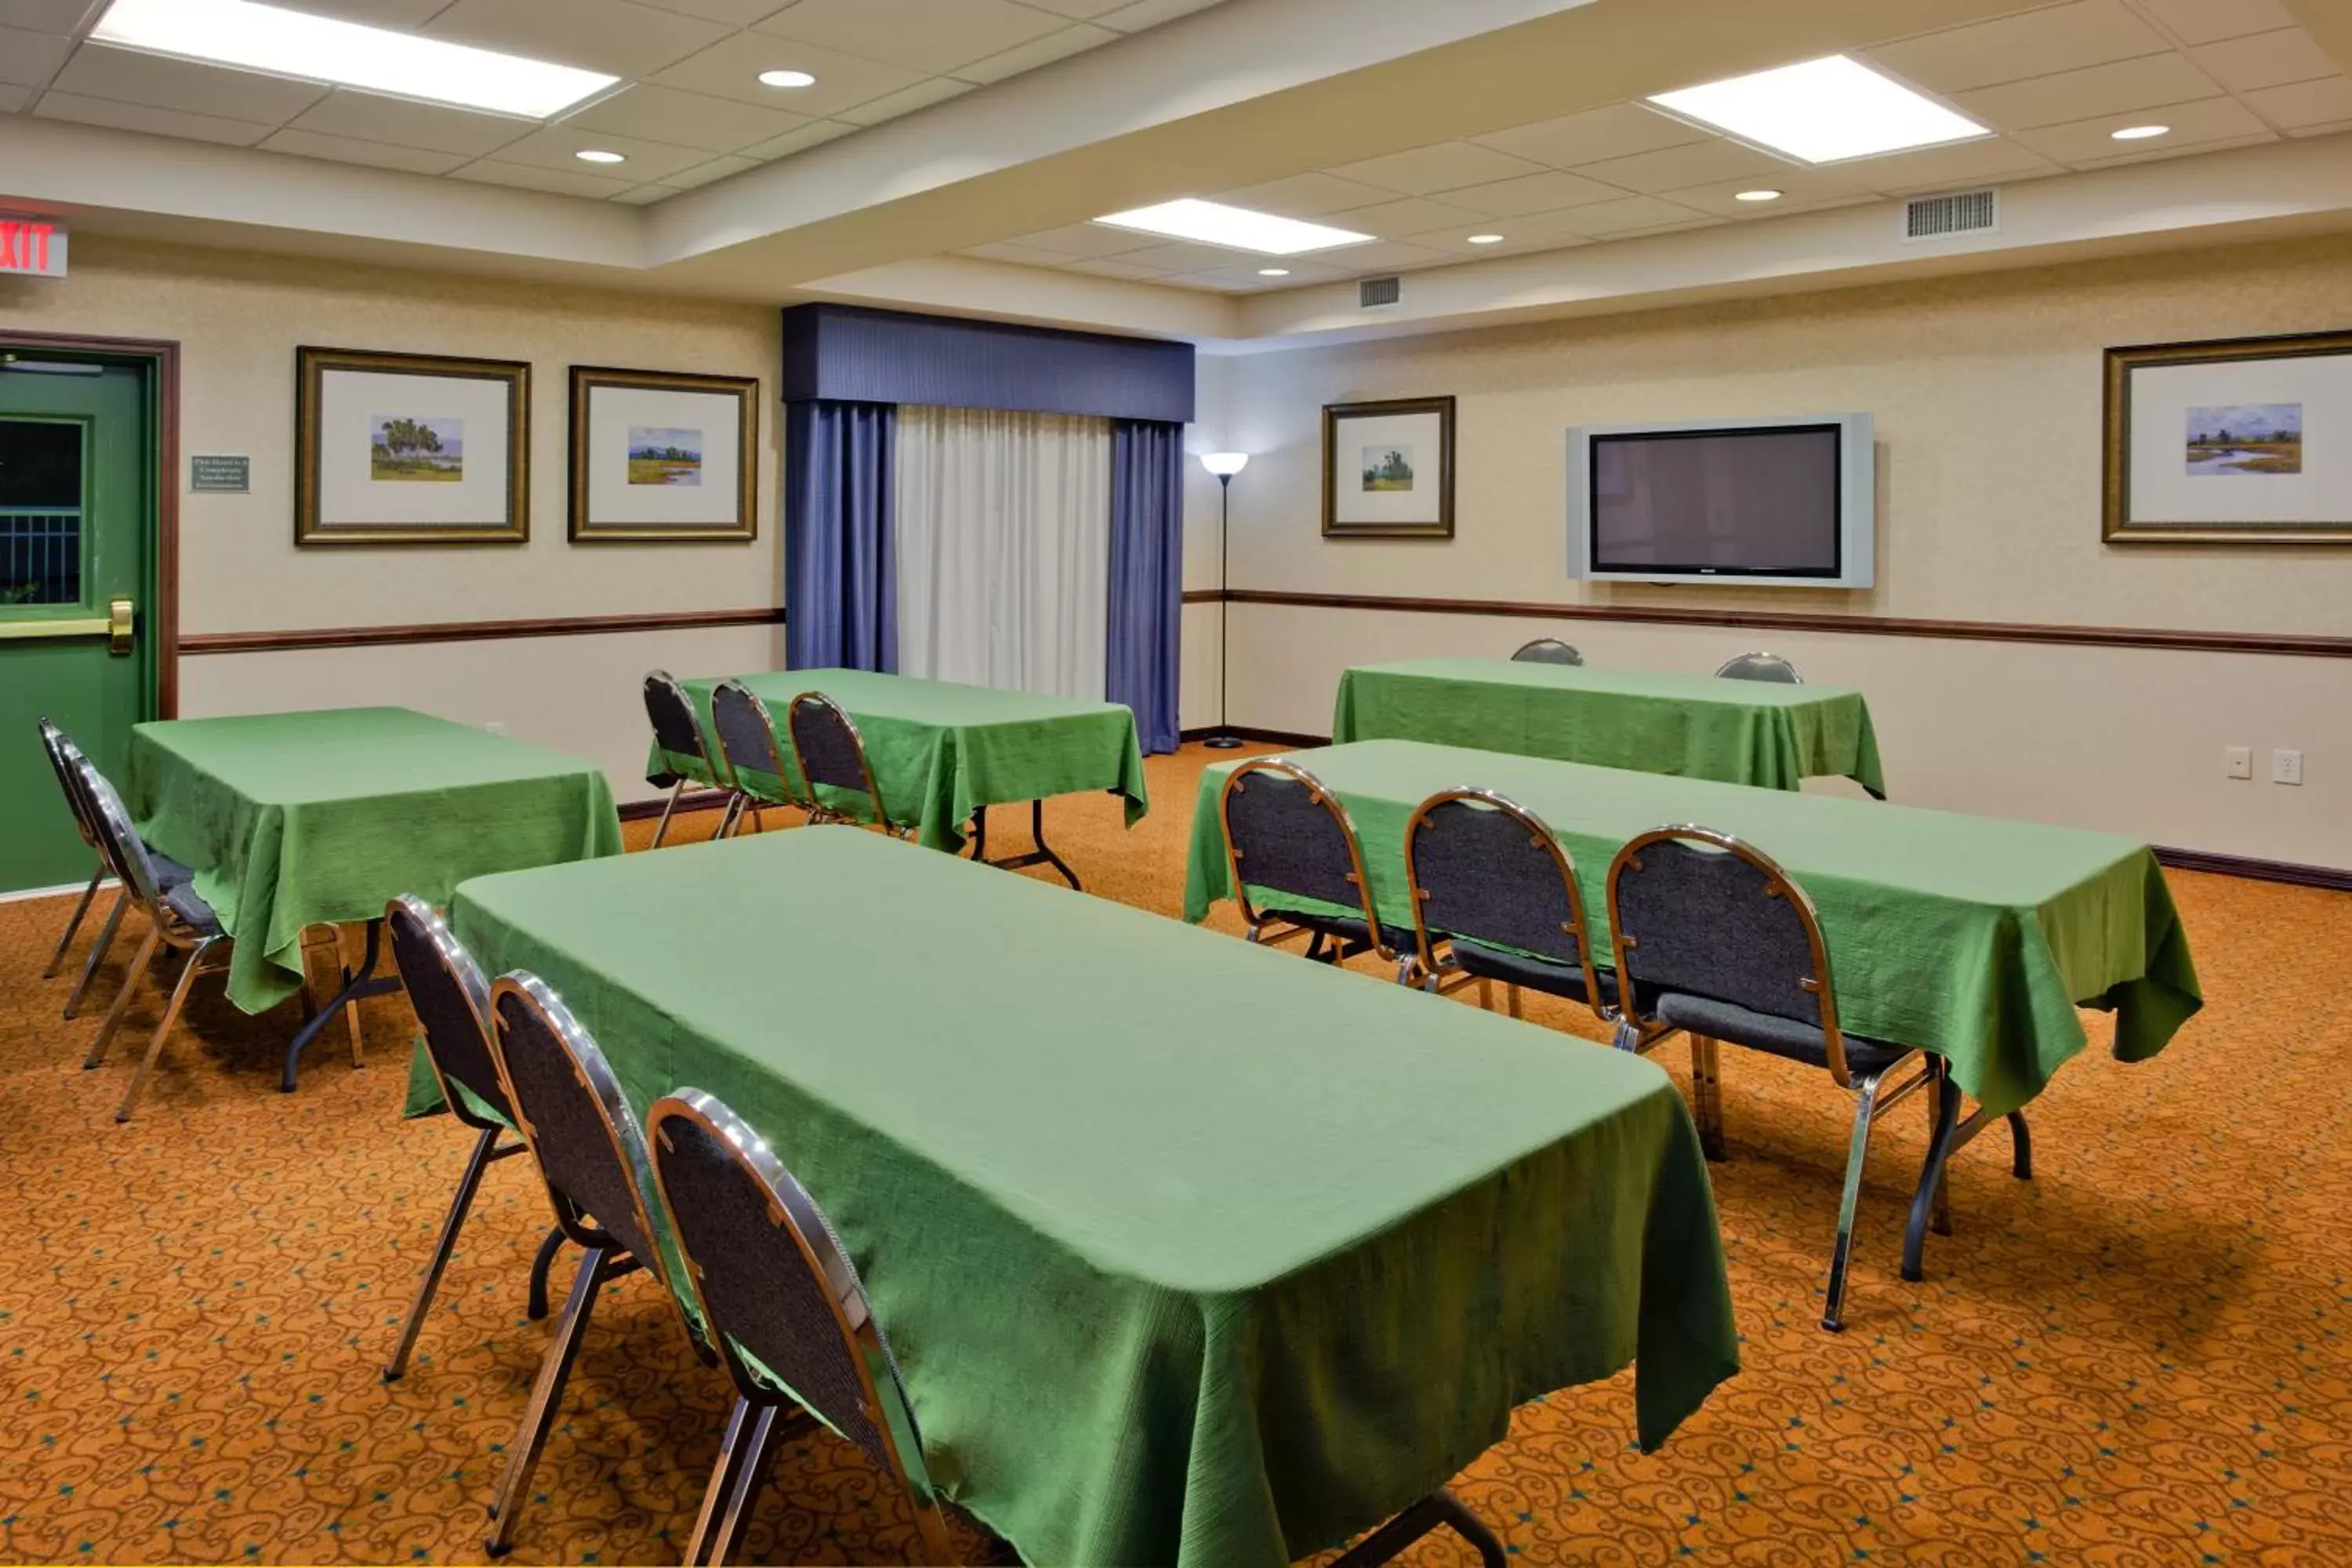 Banquet/Function facilities, Business Area/Conference Room in Country Inn & Suites by Radisson, Port Charlotte, FL